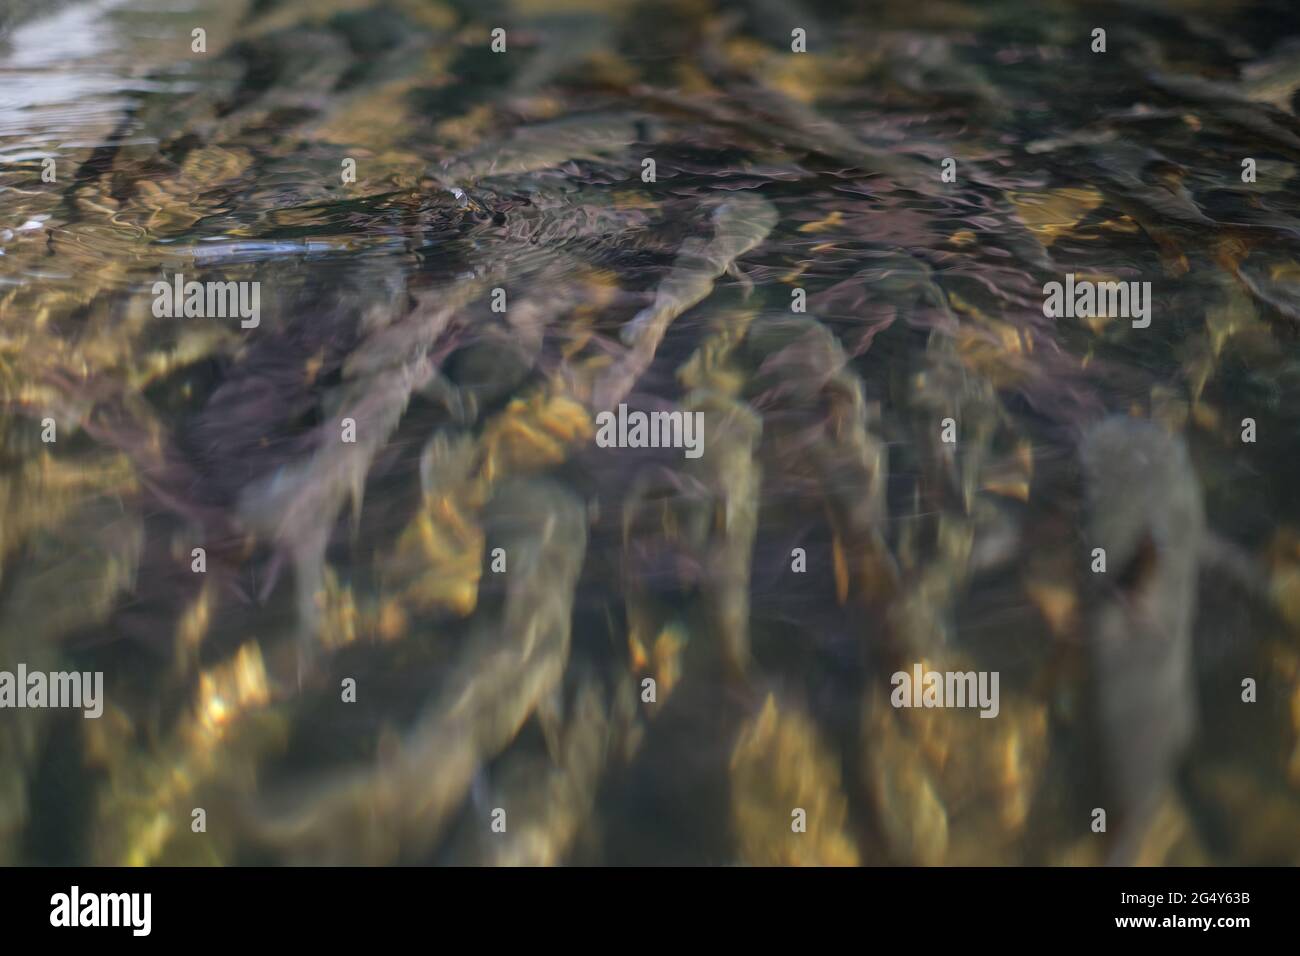 A school of large freshwater fish is going upstream in a transparent shallow creek Stock Photo